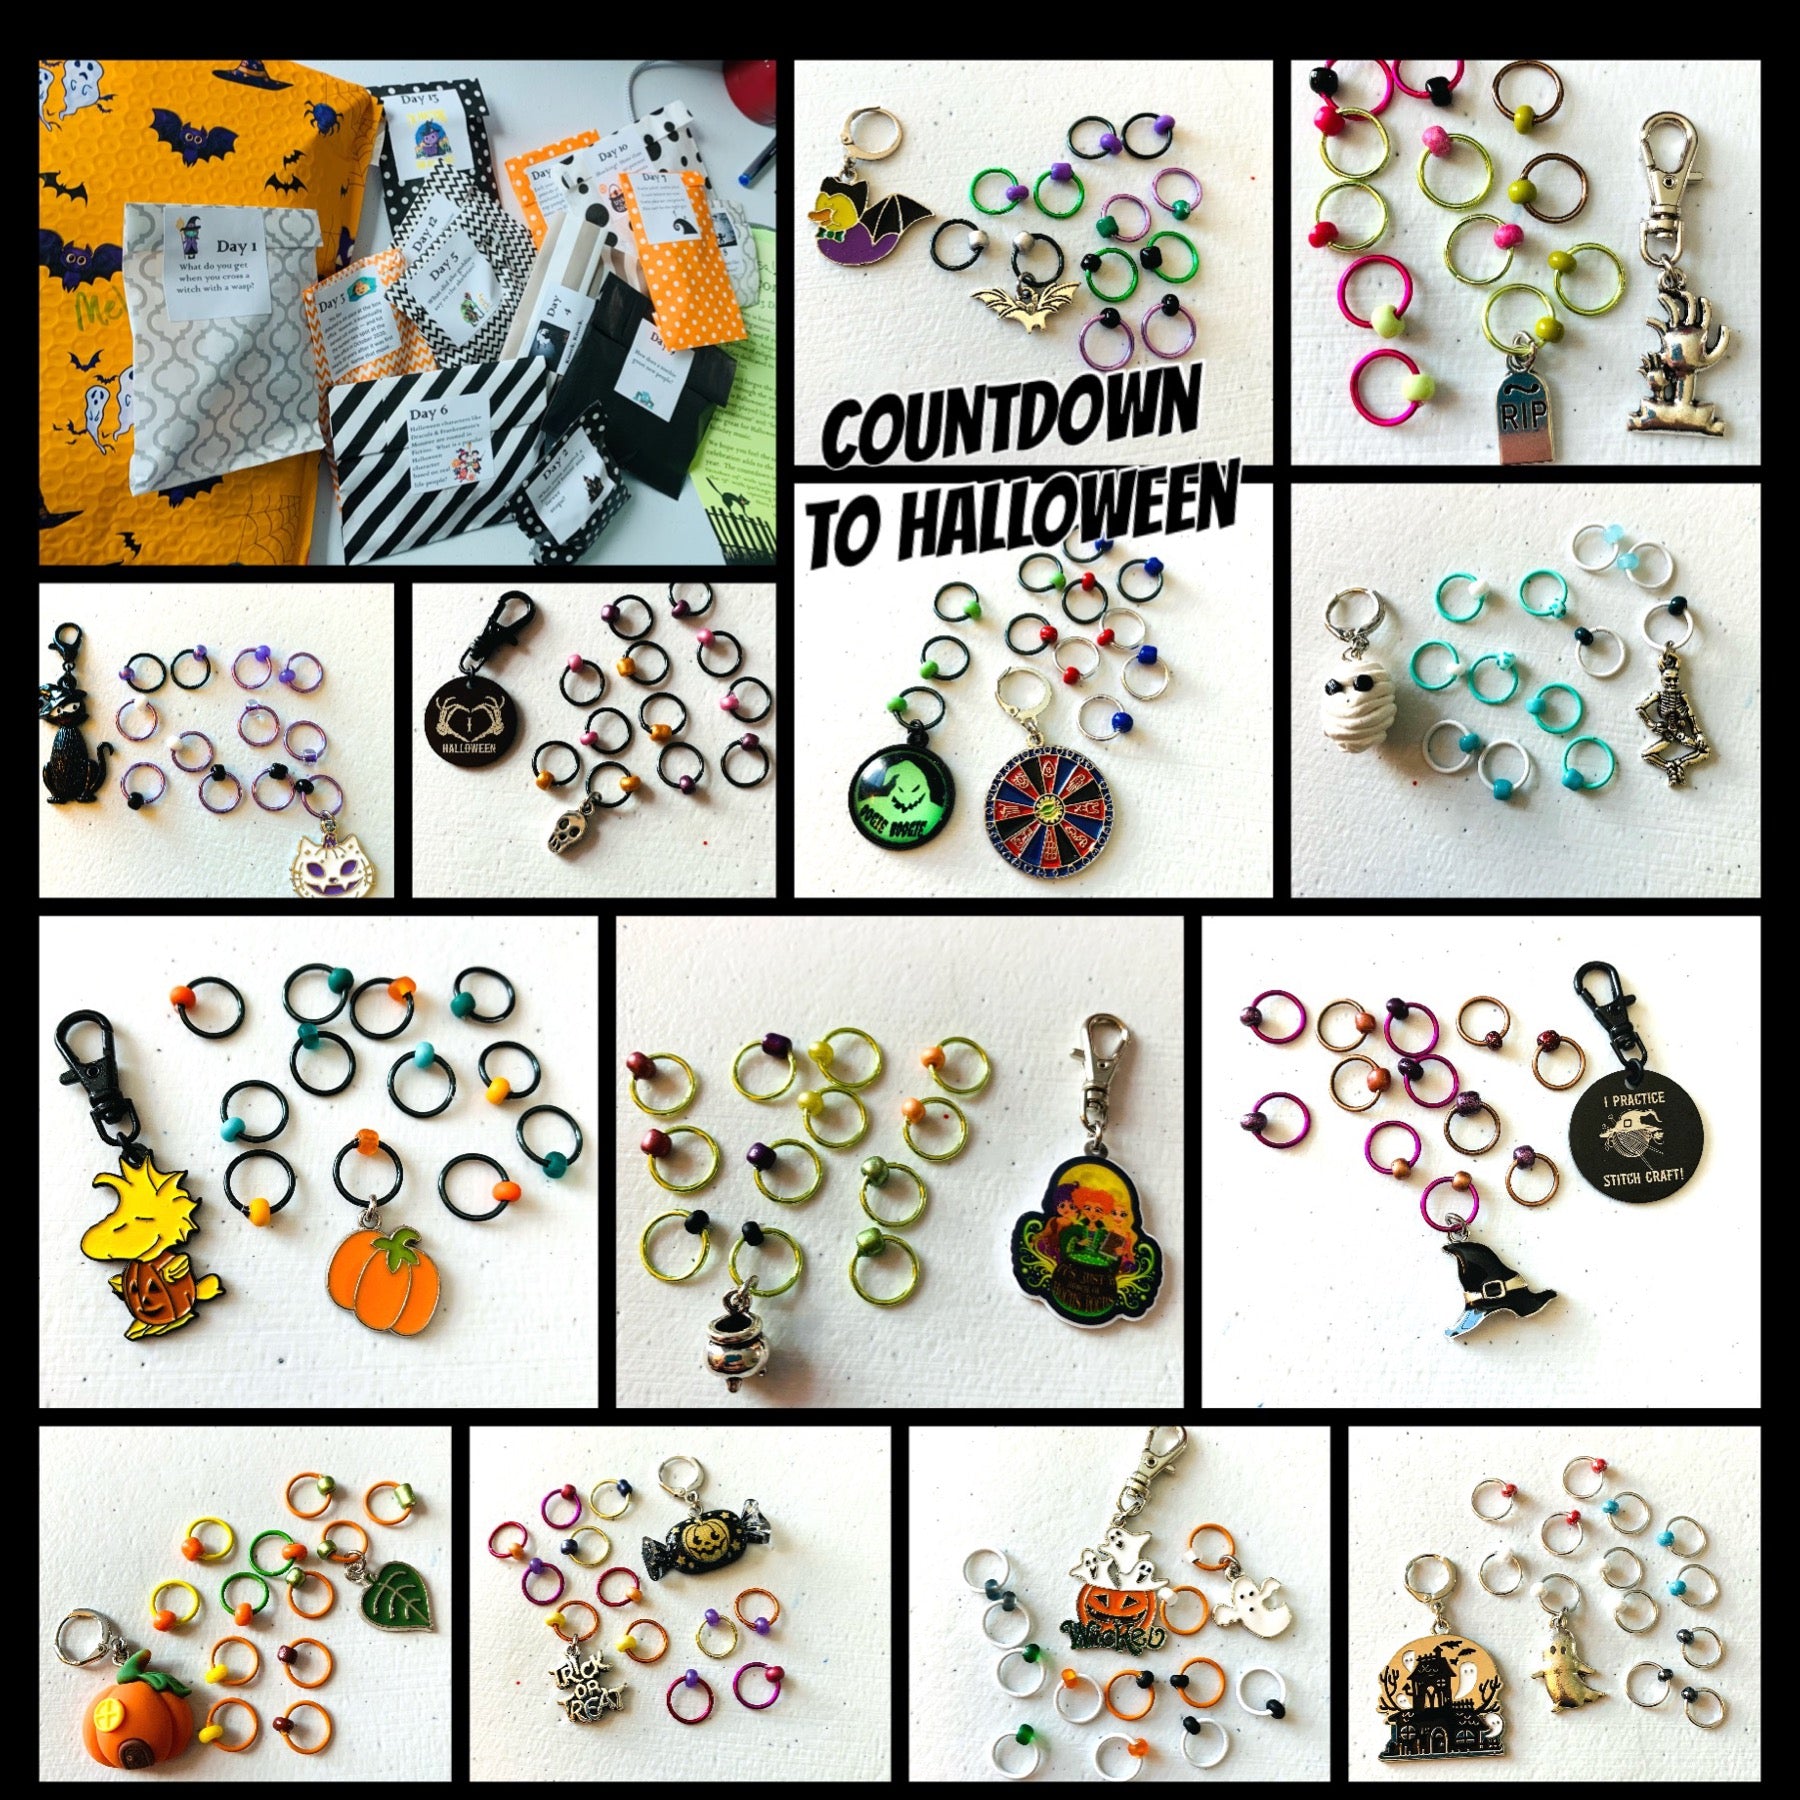 2024 13 Days of Halloween Countdown Club, 13 Days of Progress & Stitch Markers with a Project Bag and a Skein of Yarn - AdoreKnit